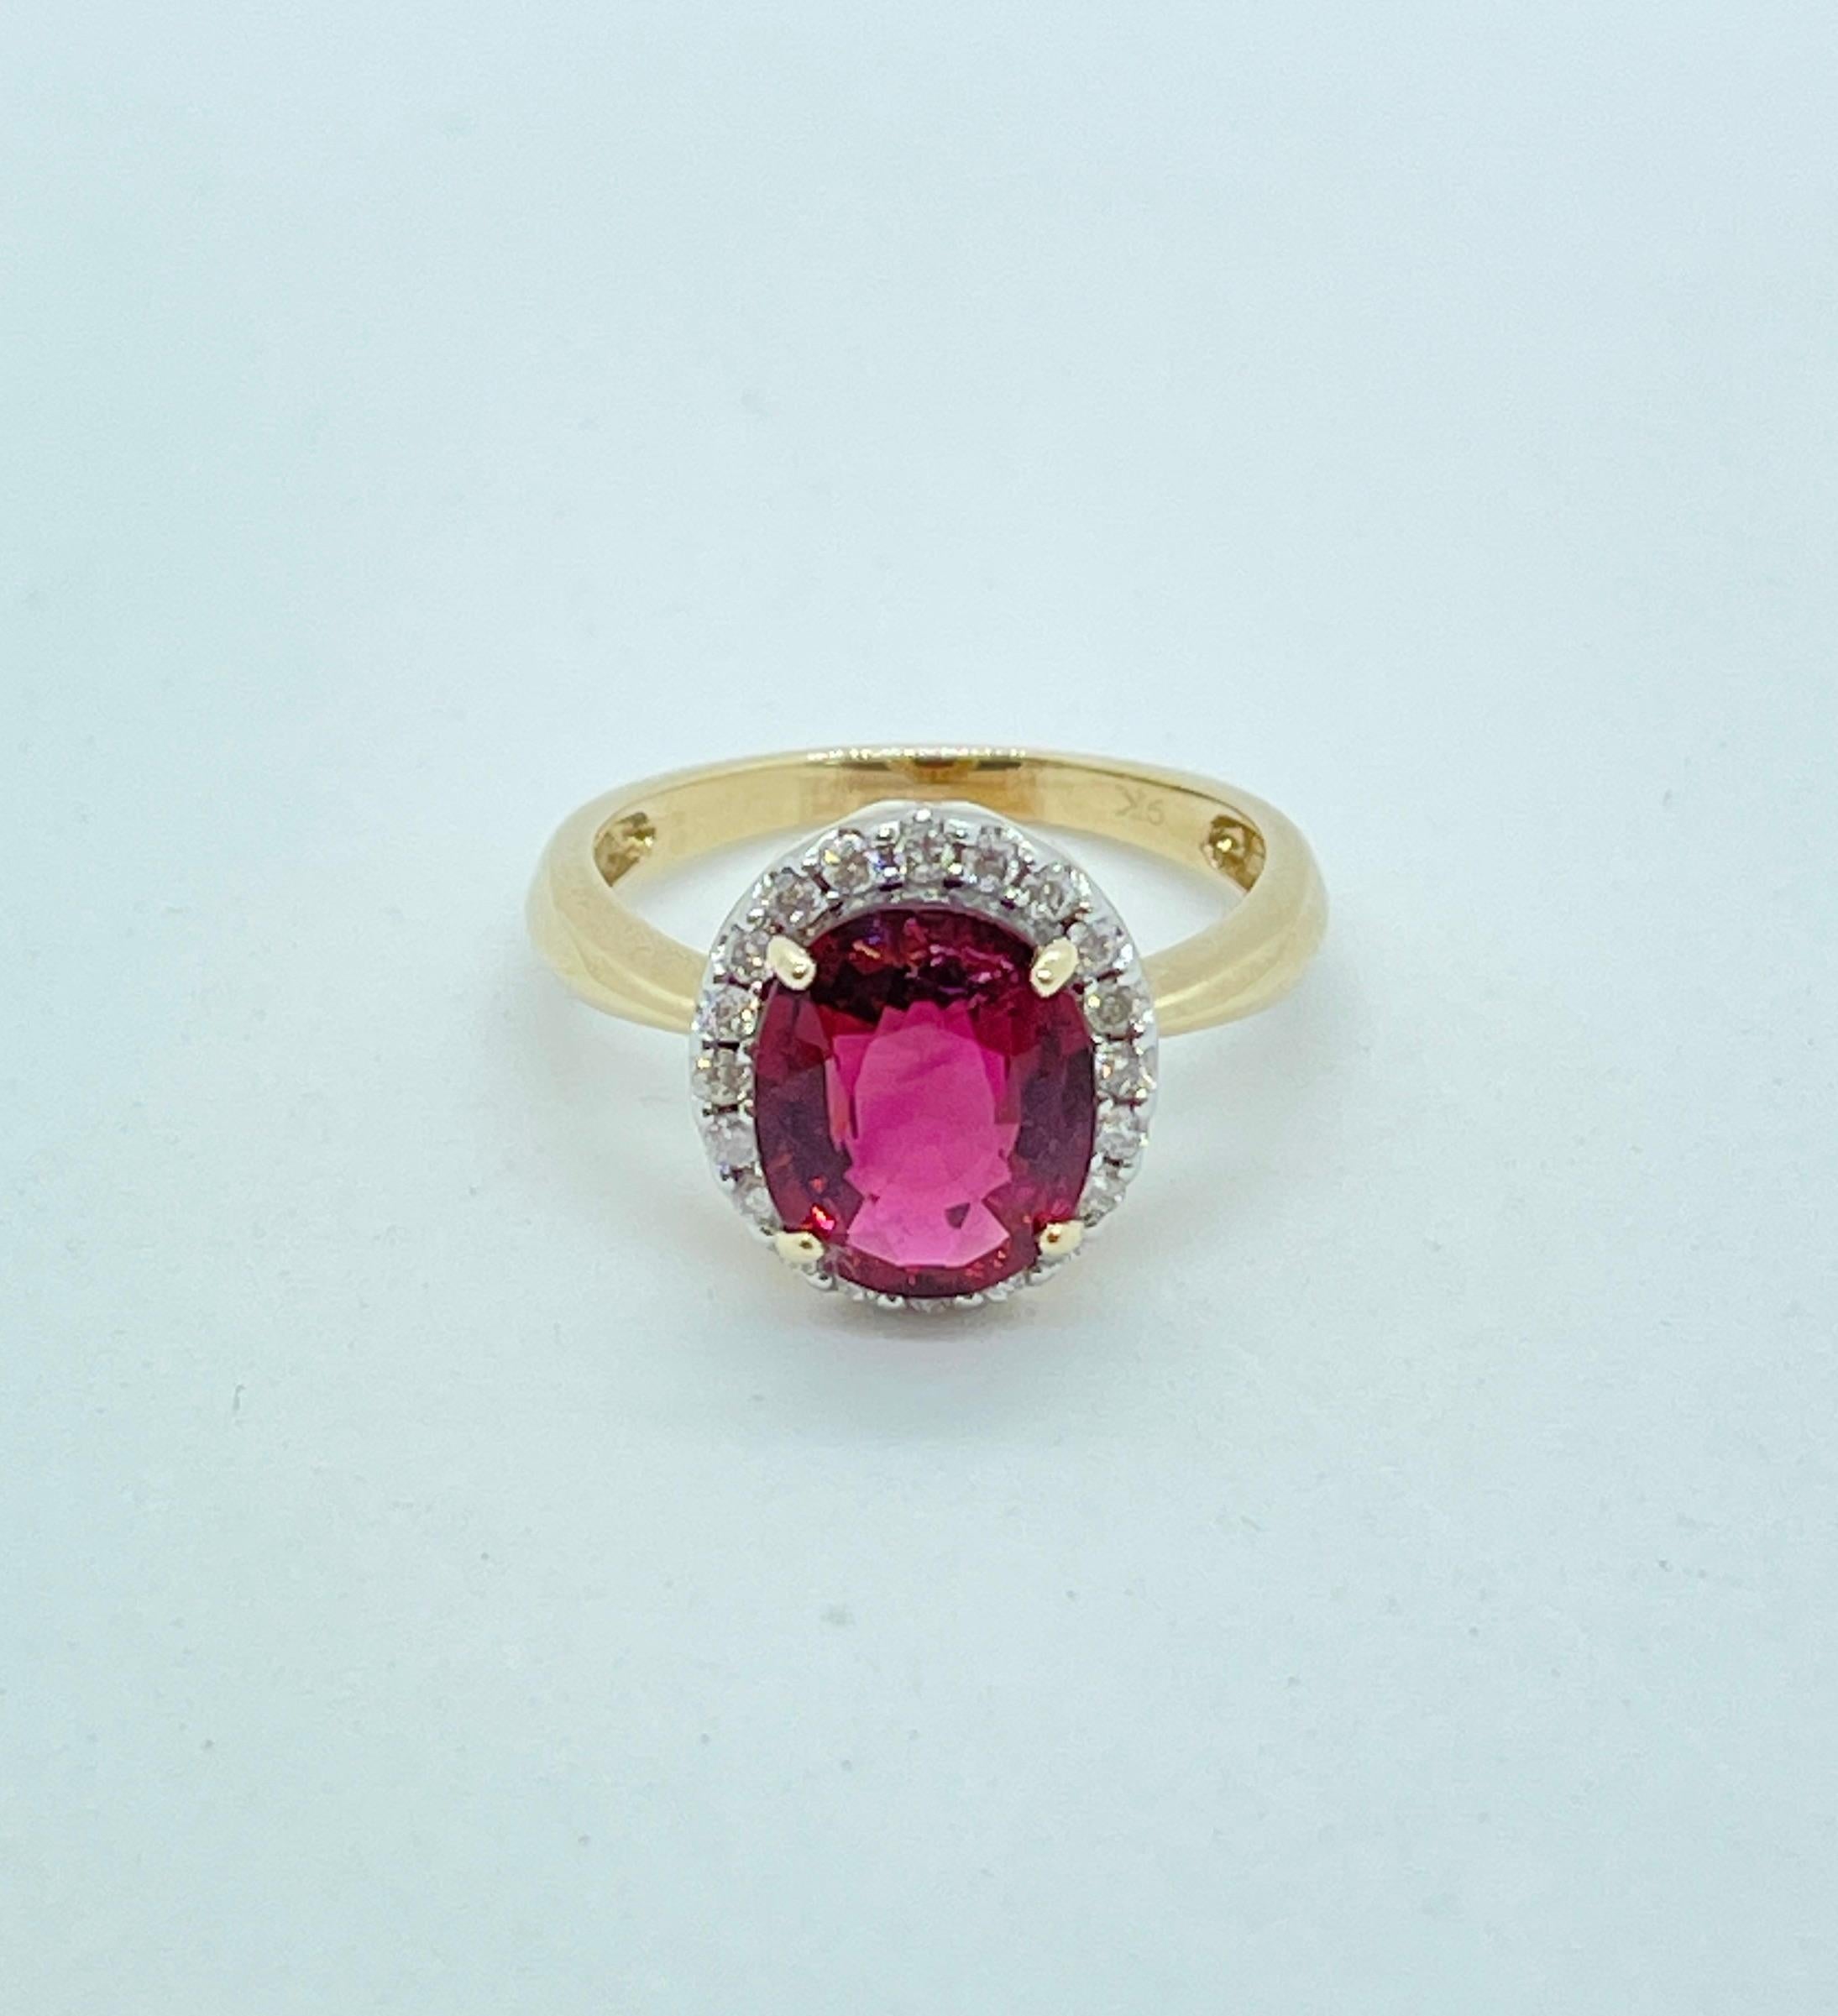 Genuine Natural Rubellite Tourmaline Diamond Halo Ring 9ct Yellow Gold Valuation For Sale 5